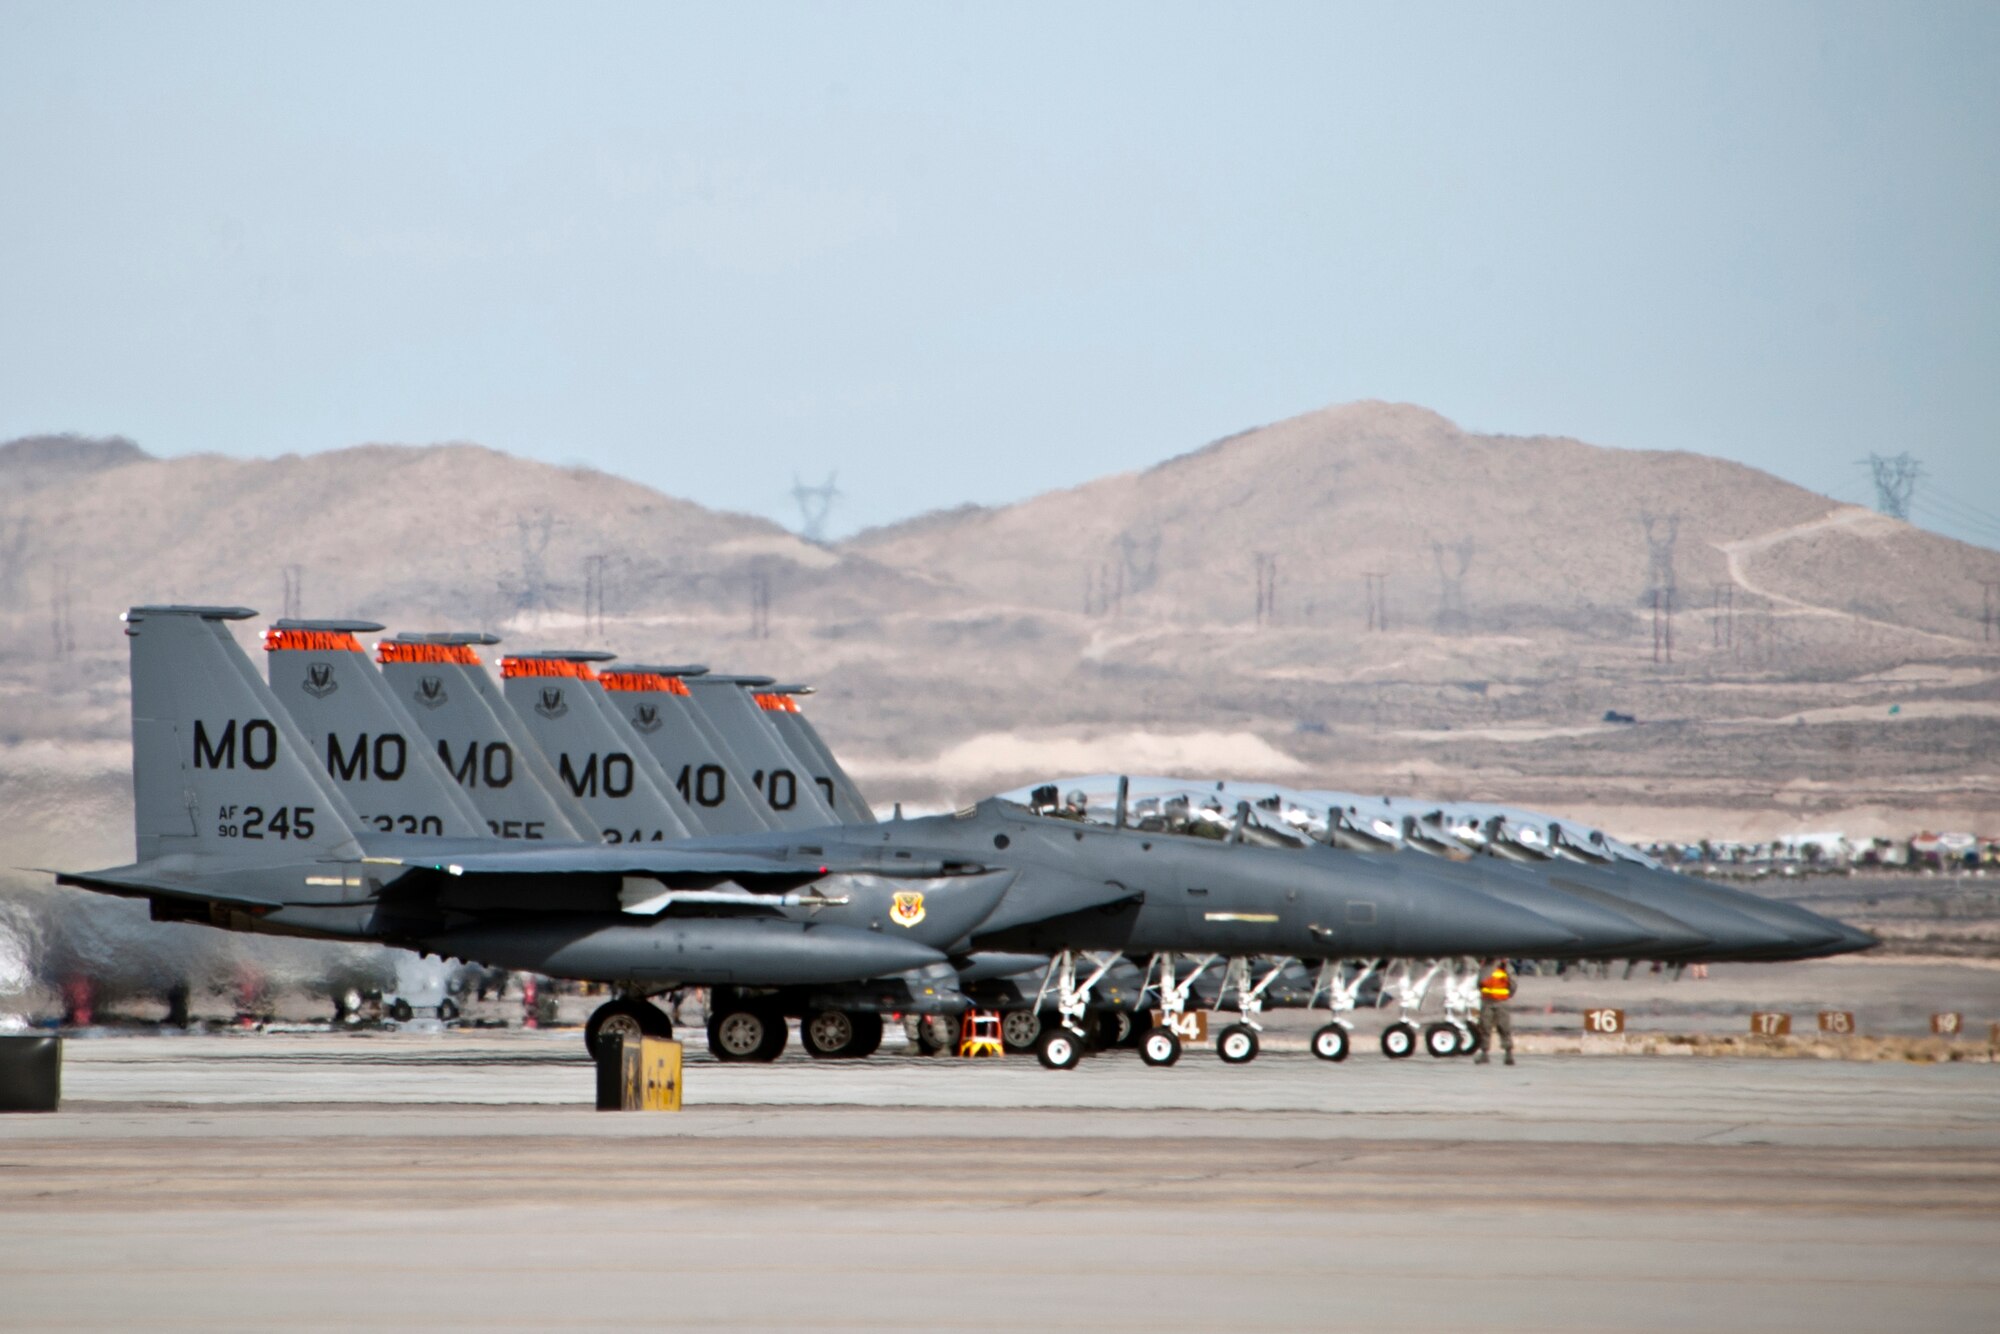 Seven F-15E Strike Eagles assigned to the 391st Fighter Squadron, Mountain Home Air Force Base, Idaho, taxi into position for an end-of-runway inspection prior to a Red Flag 14-1 training mission Jan. 29, 2014, at Nellis AFB Nev. Air force units from the around the country and the world have come to Nellis to work together on simulated combat scenarios to prepare them for future real-world conflicts or war. (U.S. Air Force photo by Lorenz Crespo)